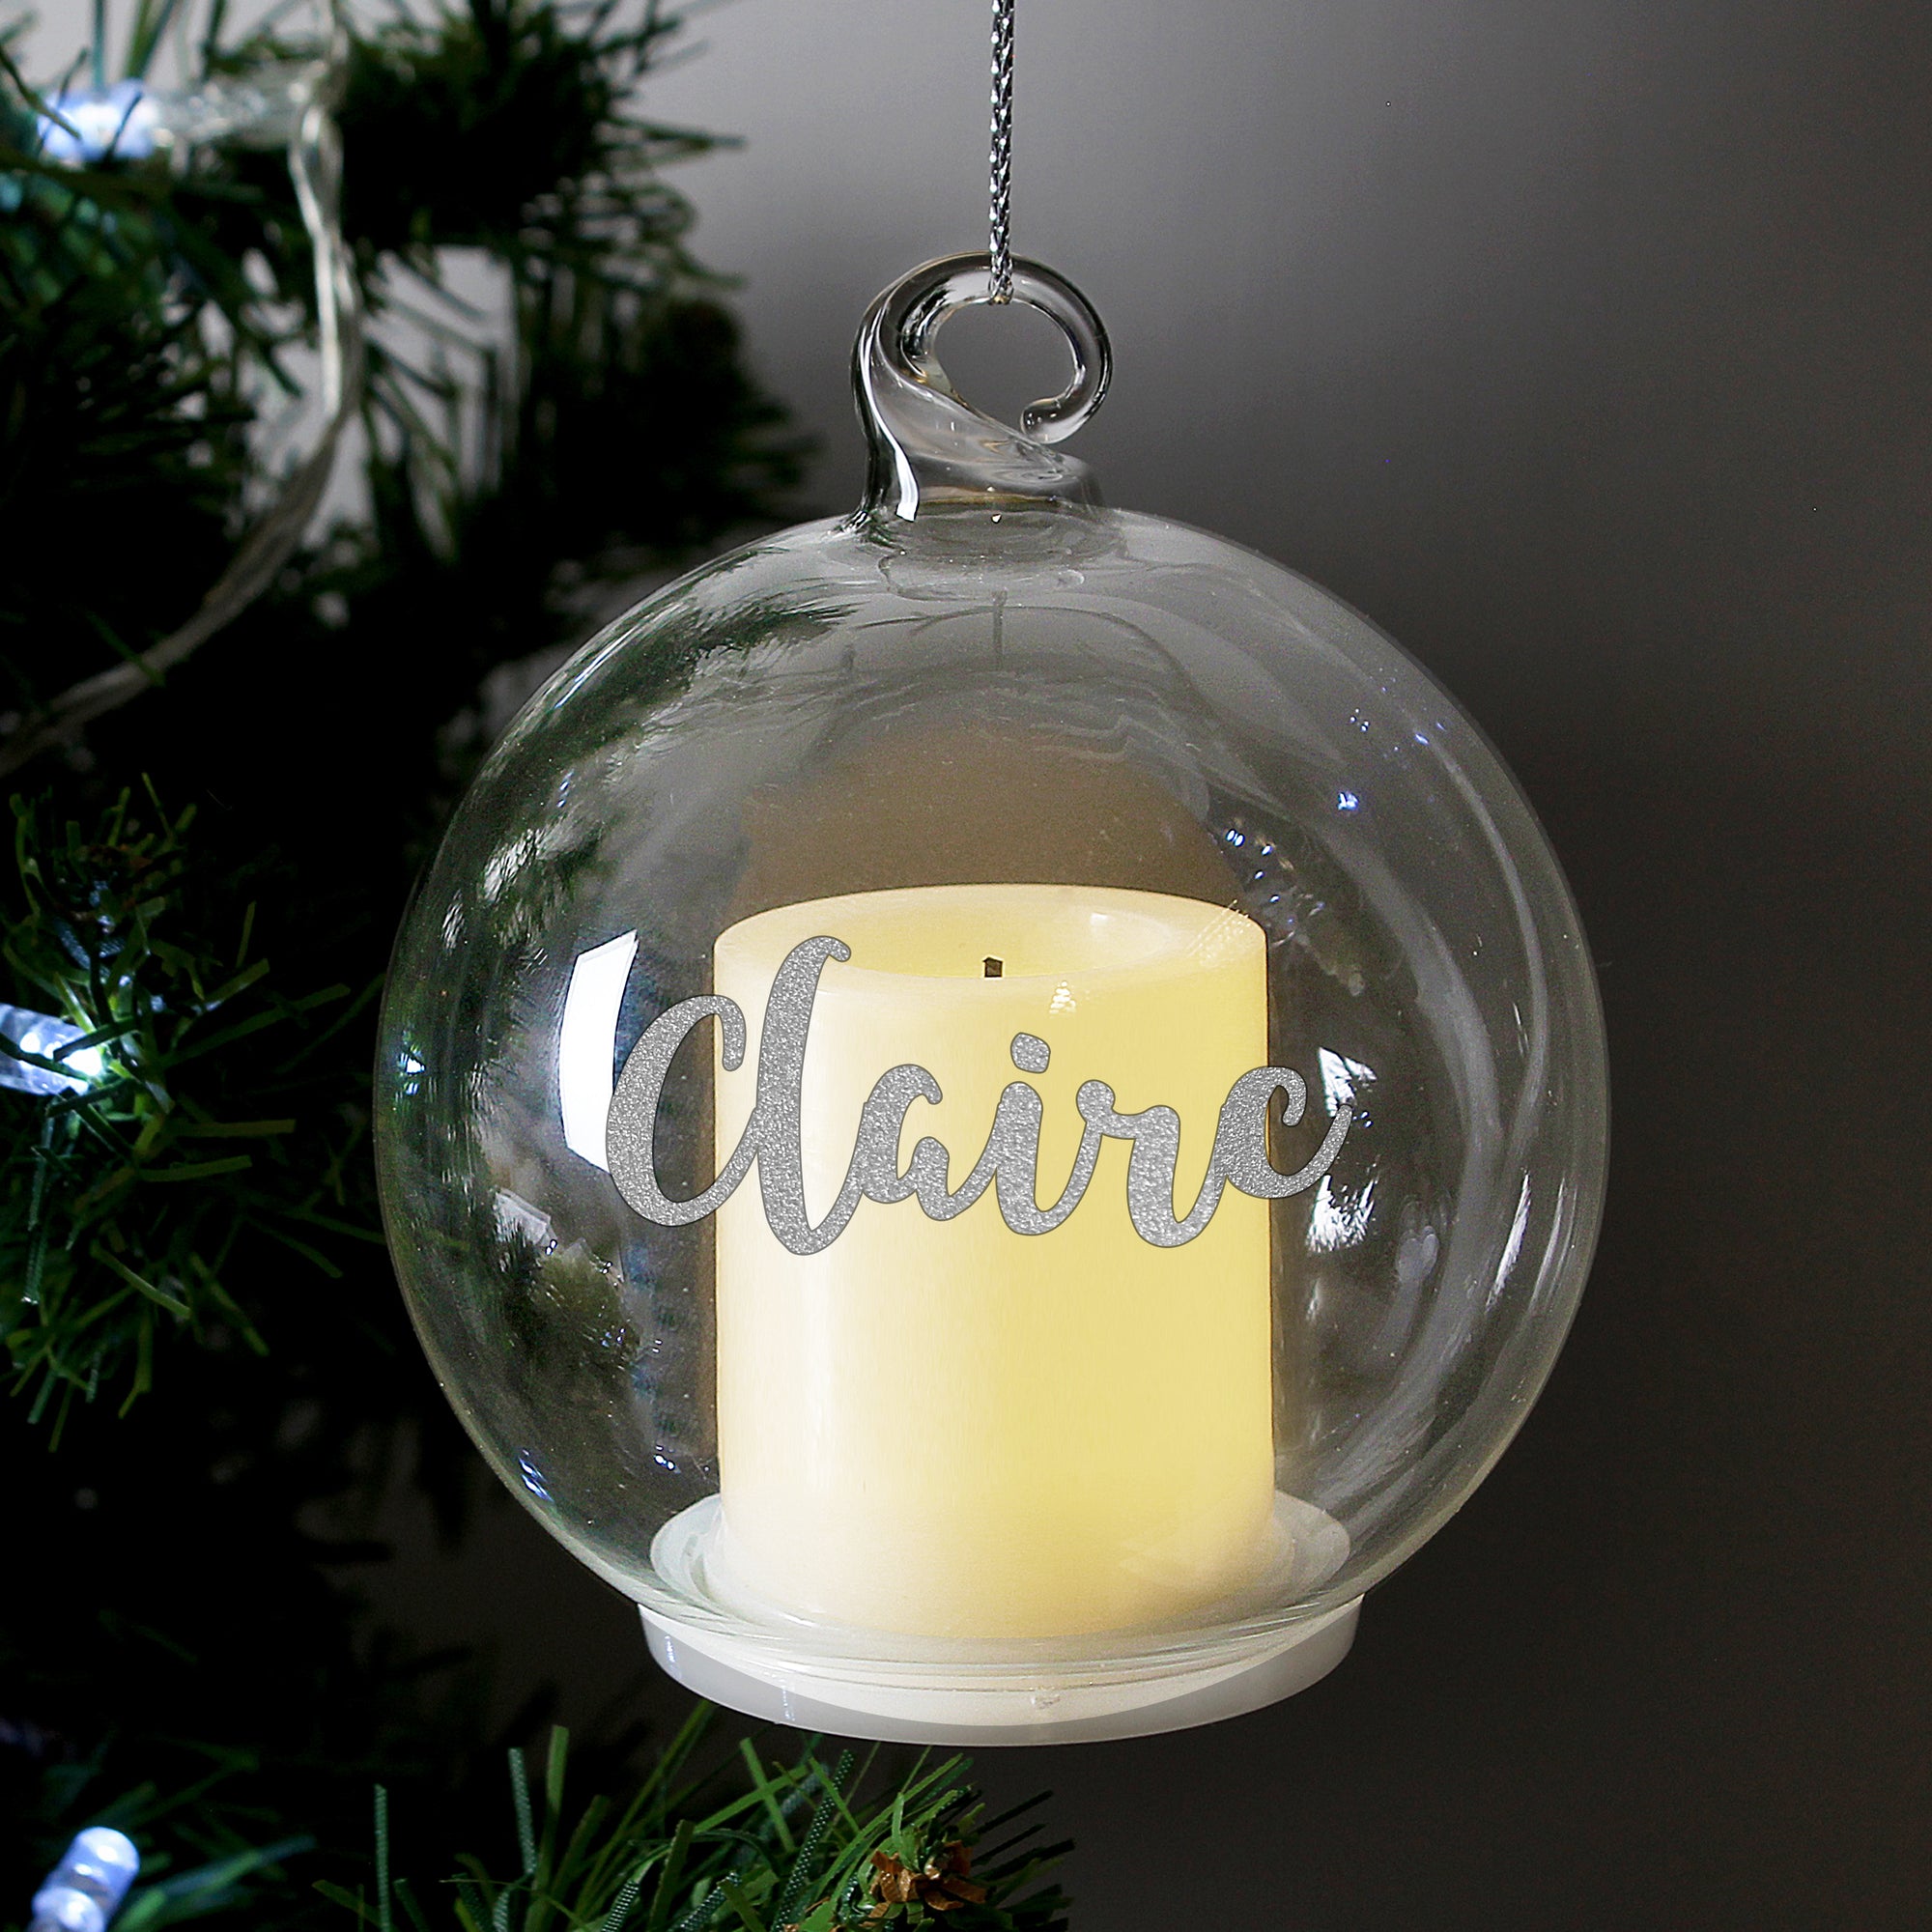 Personalised clear glass round Christmas bauble which has a battery operated cream yellow LED candle inside.  The bauble can be personalsied with a name in a silver hand-written styled modern font and comes with a silver thread to hang it up.